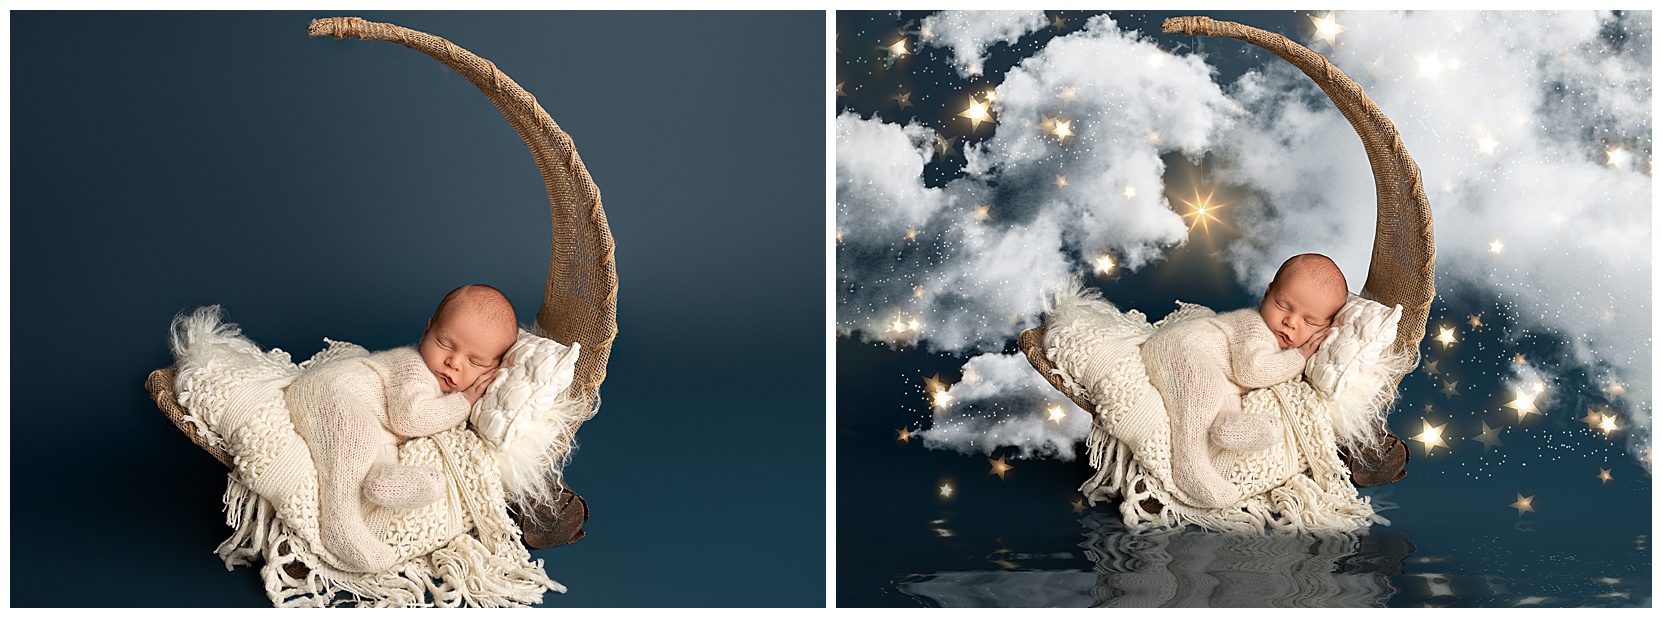 A series of two newborn photos. The left photo is before photoshop edits of a newborn on a jute moon on a blue background, the right is the same photo with photoshopped clounds, stars, and a water reflection on the bottom.